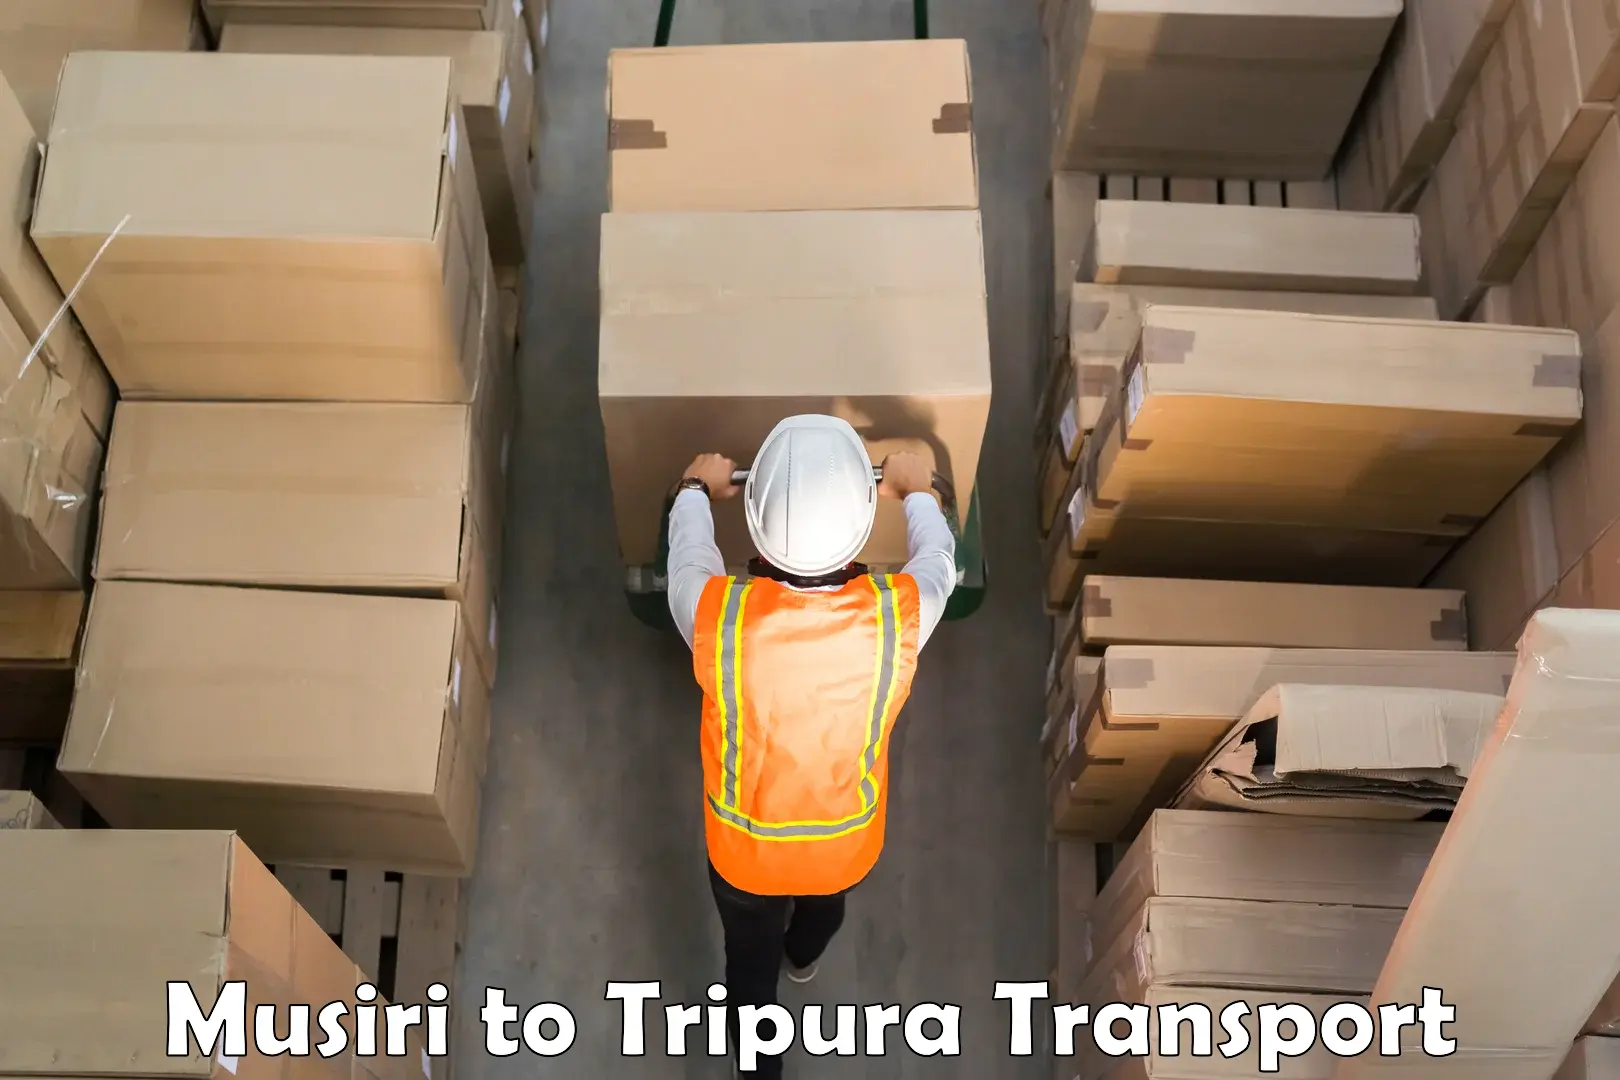 Part load transport service in India Musiri to Udaipur Tripura